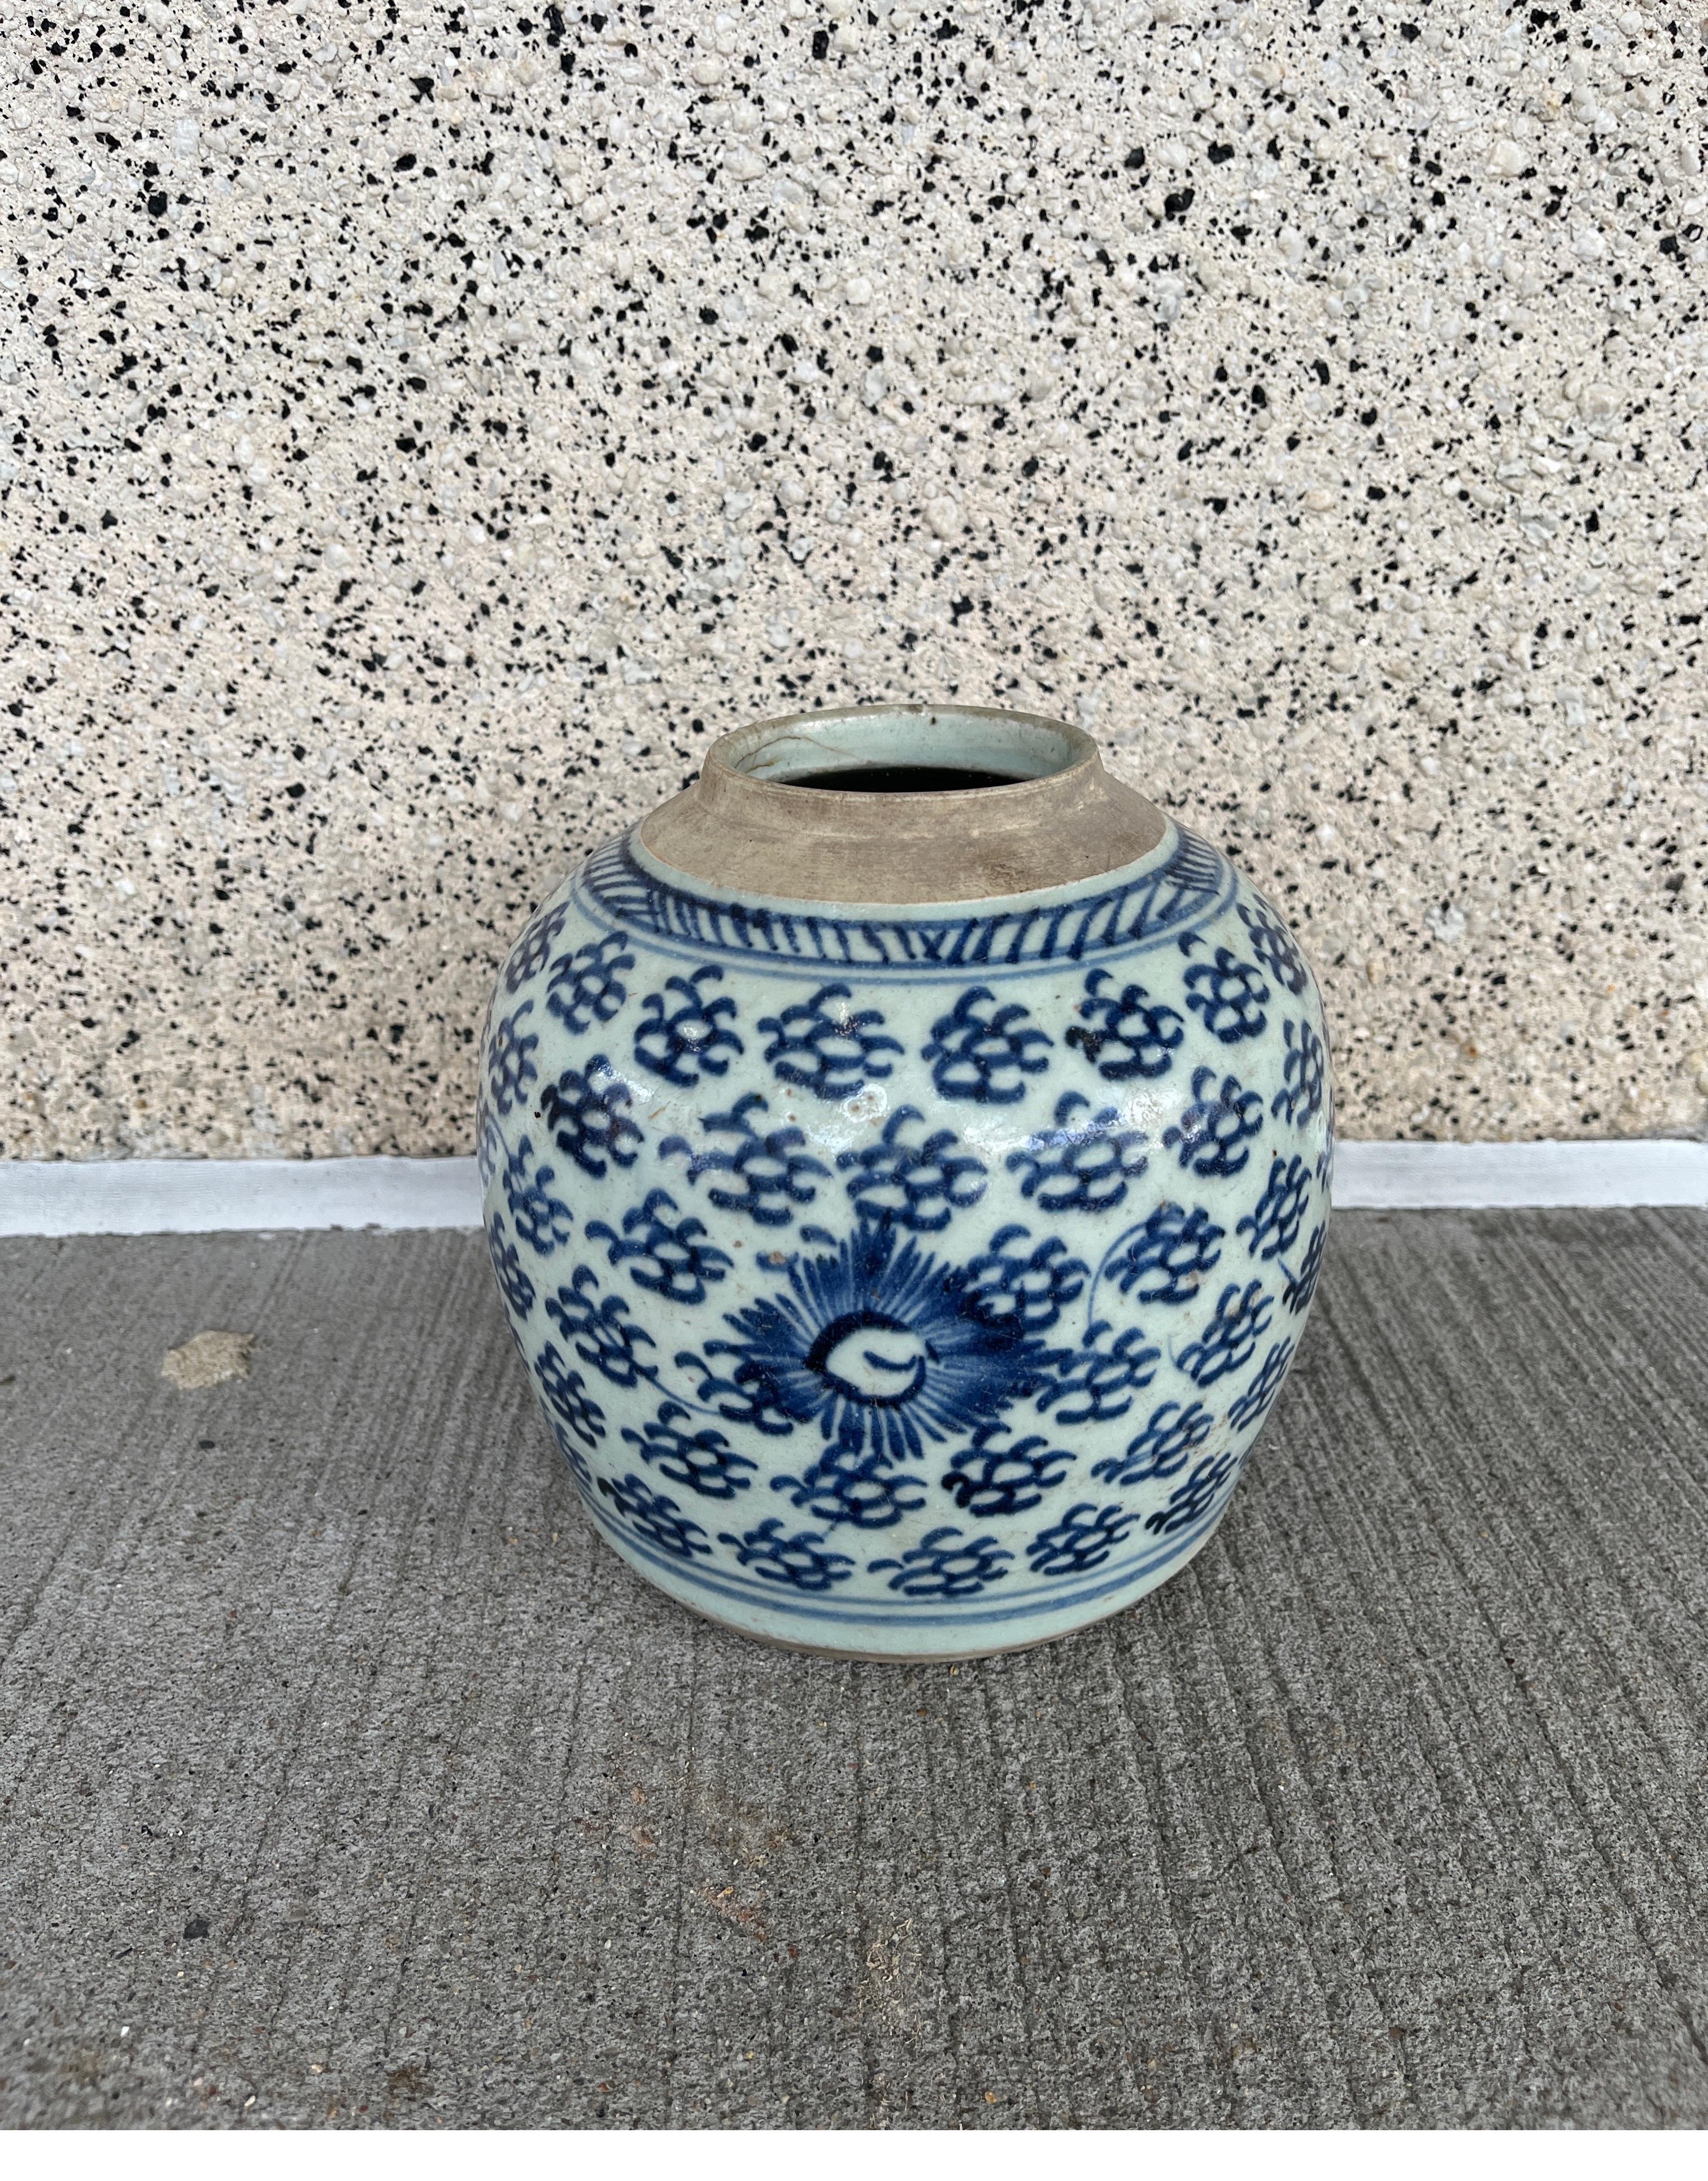 A classic, antique Chinese porcelain jar, circa 1850. This unusual, hand painted piece evokes it's mid-19th Century period, yet fits in and enhances a contemporary interior. This heavy porcelain jar literally glows on a shelf, punching well above